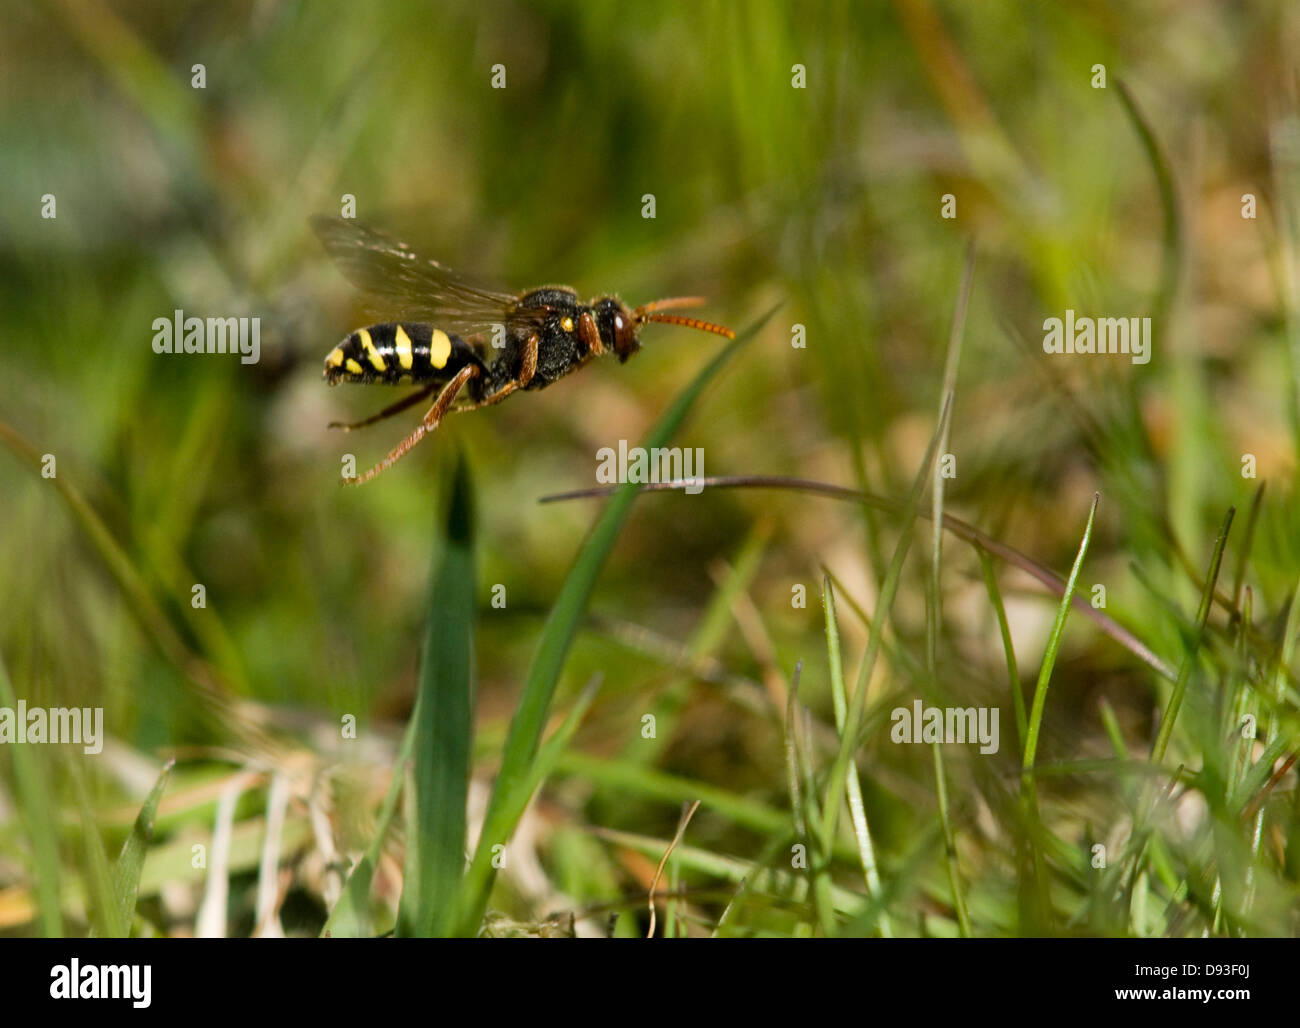 Hymenopteran flying over the grass, Sweden. Stock Photo